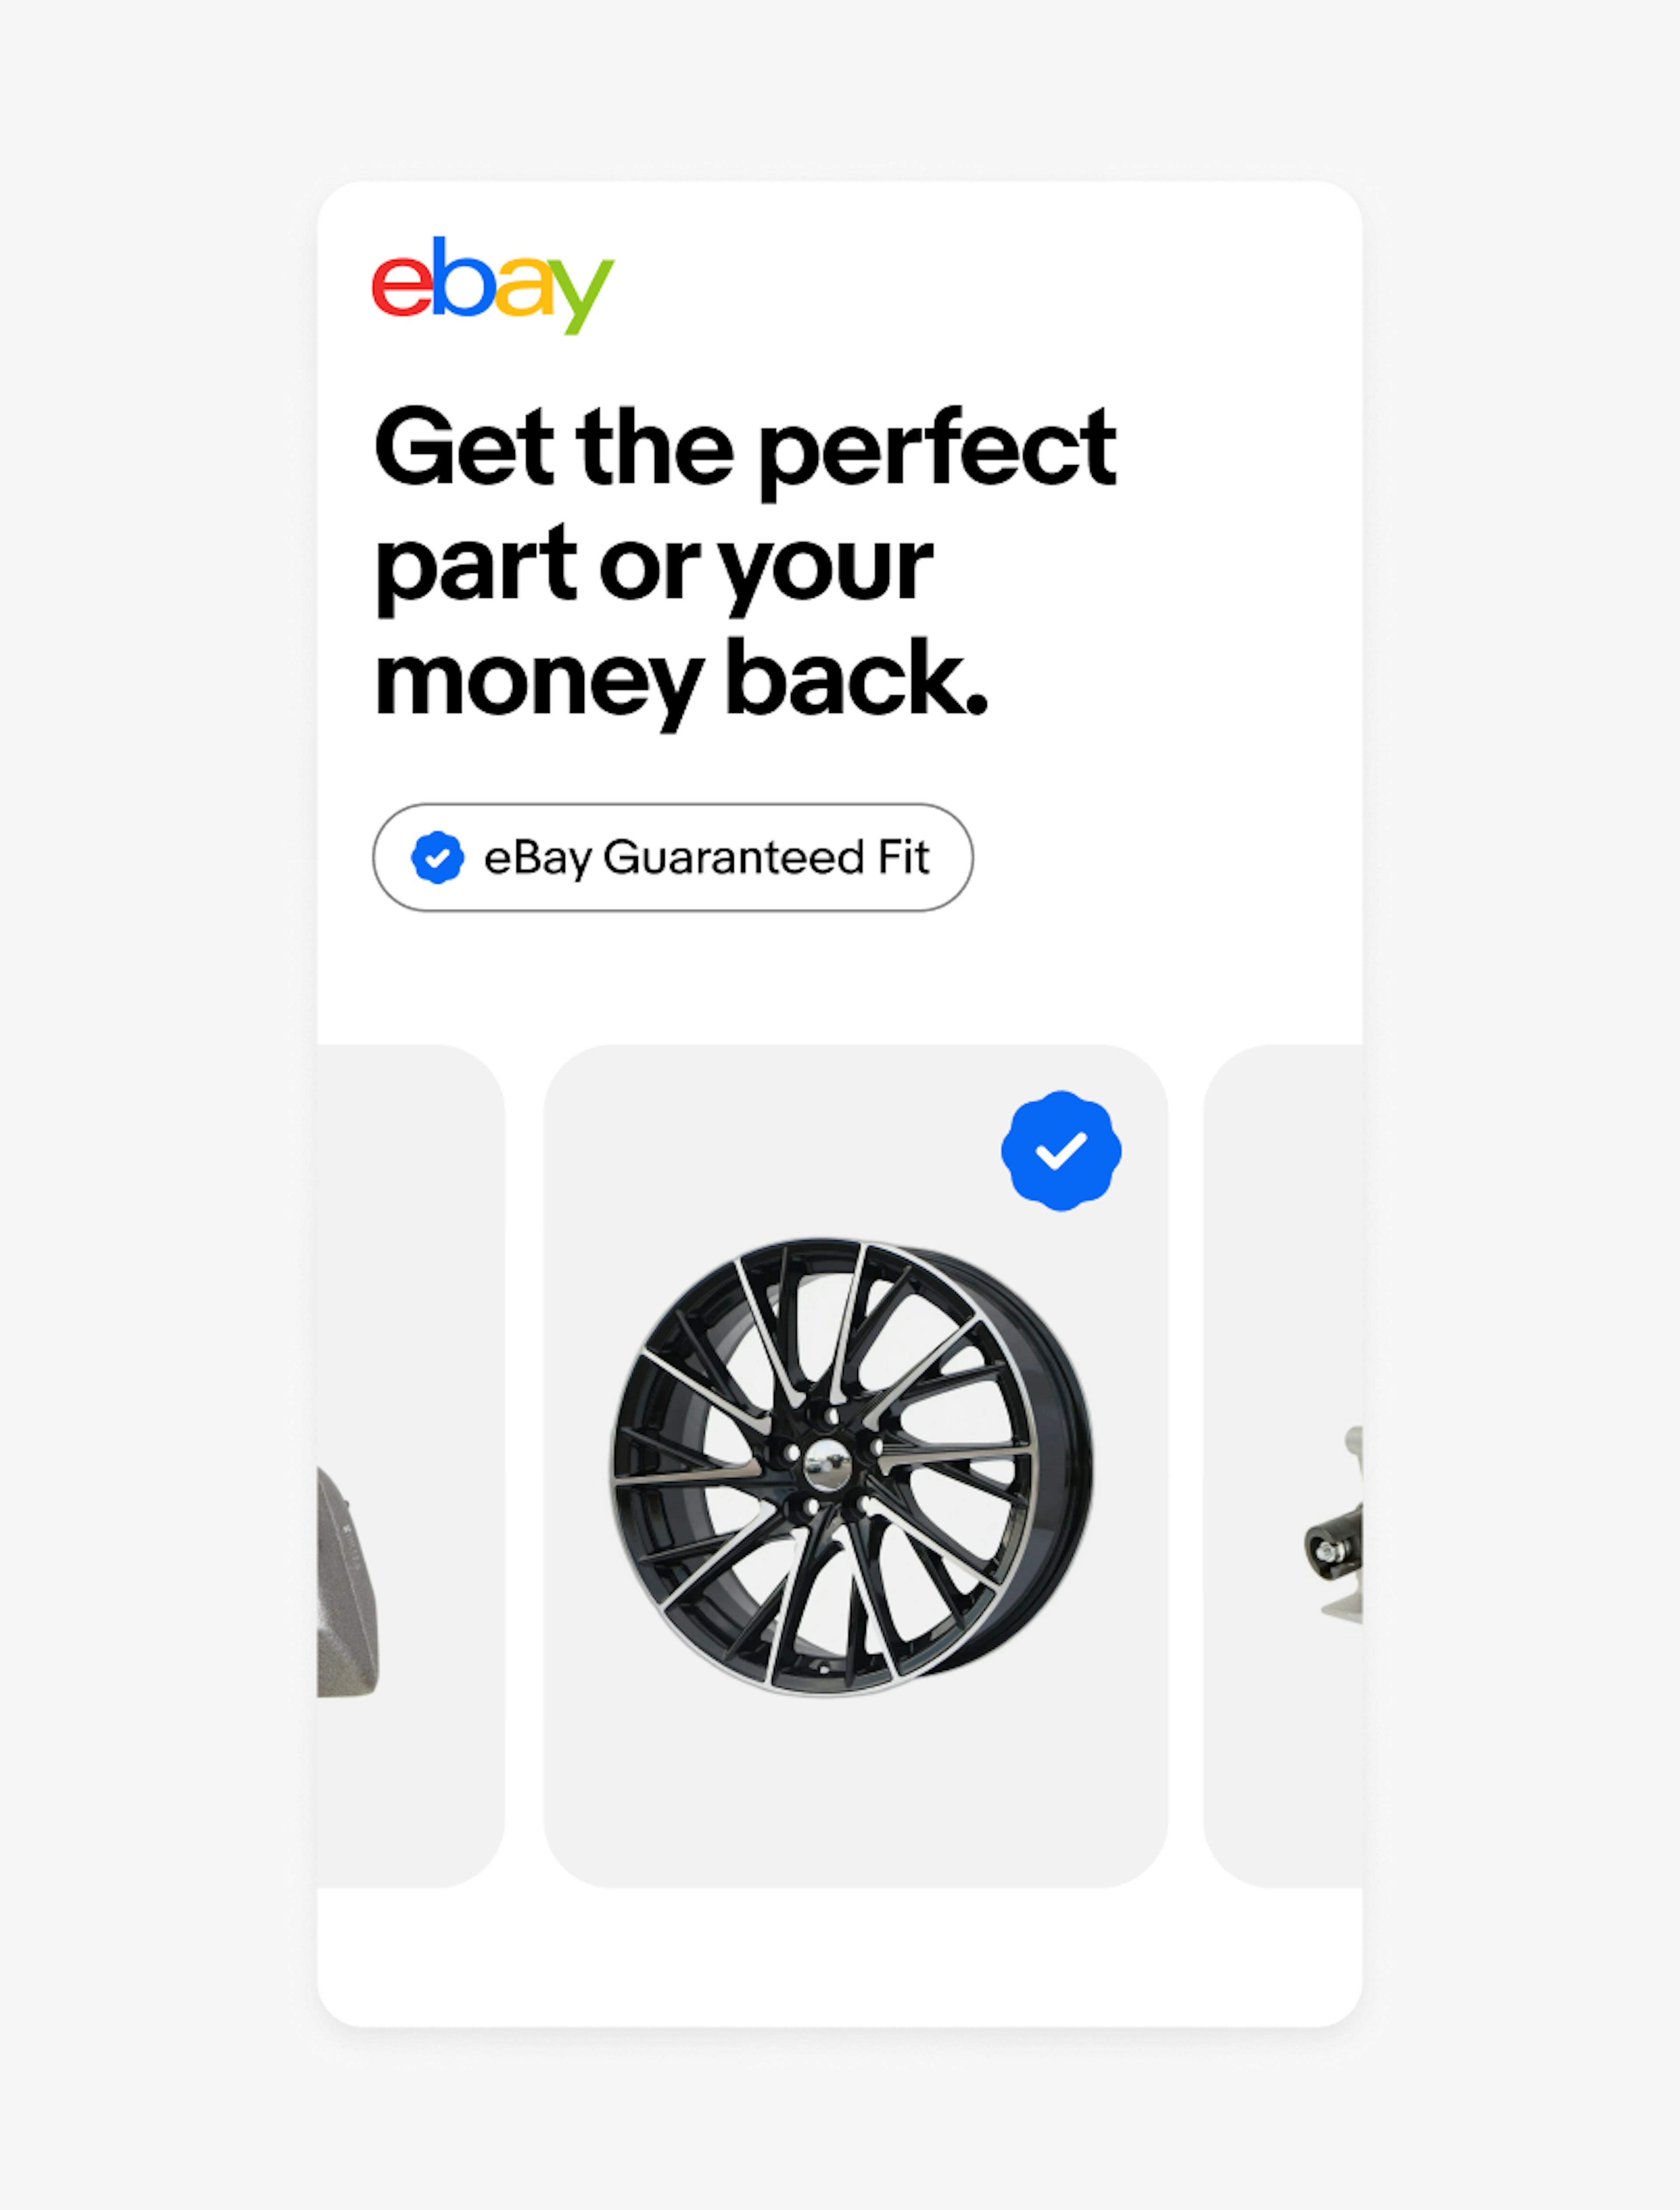 An ad with a filled rosette checkmark icon placed on top of an image of a car rim. The same filled icon is used in a program badge lockup within a pill shape towards the top.